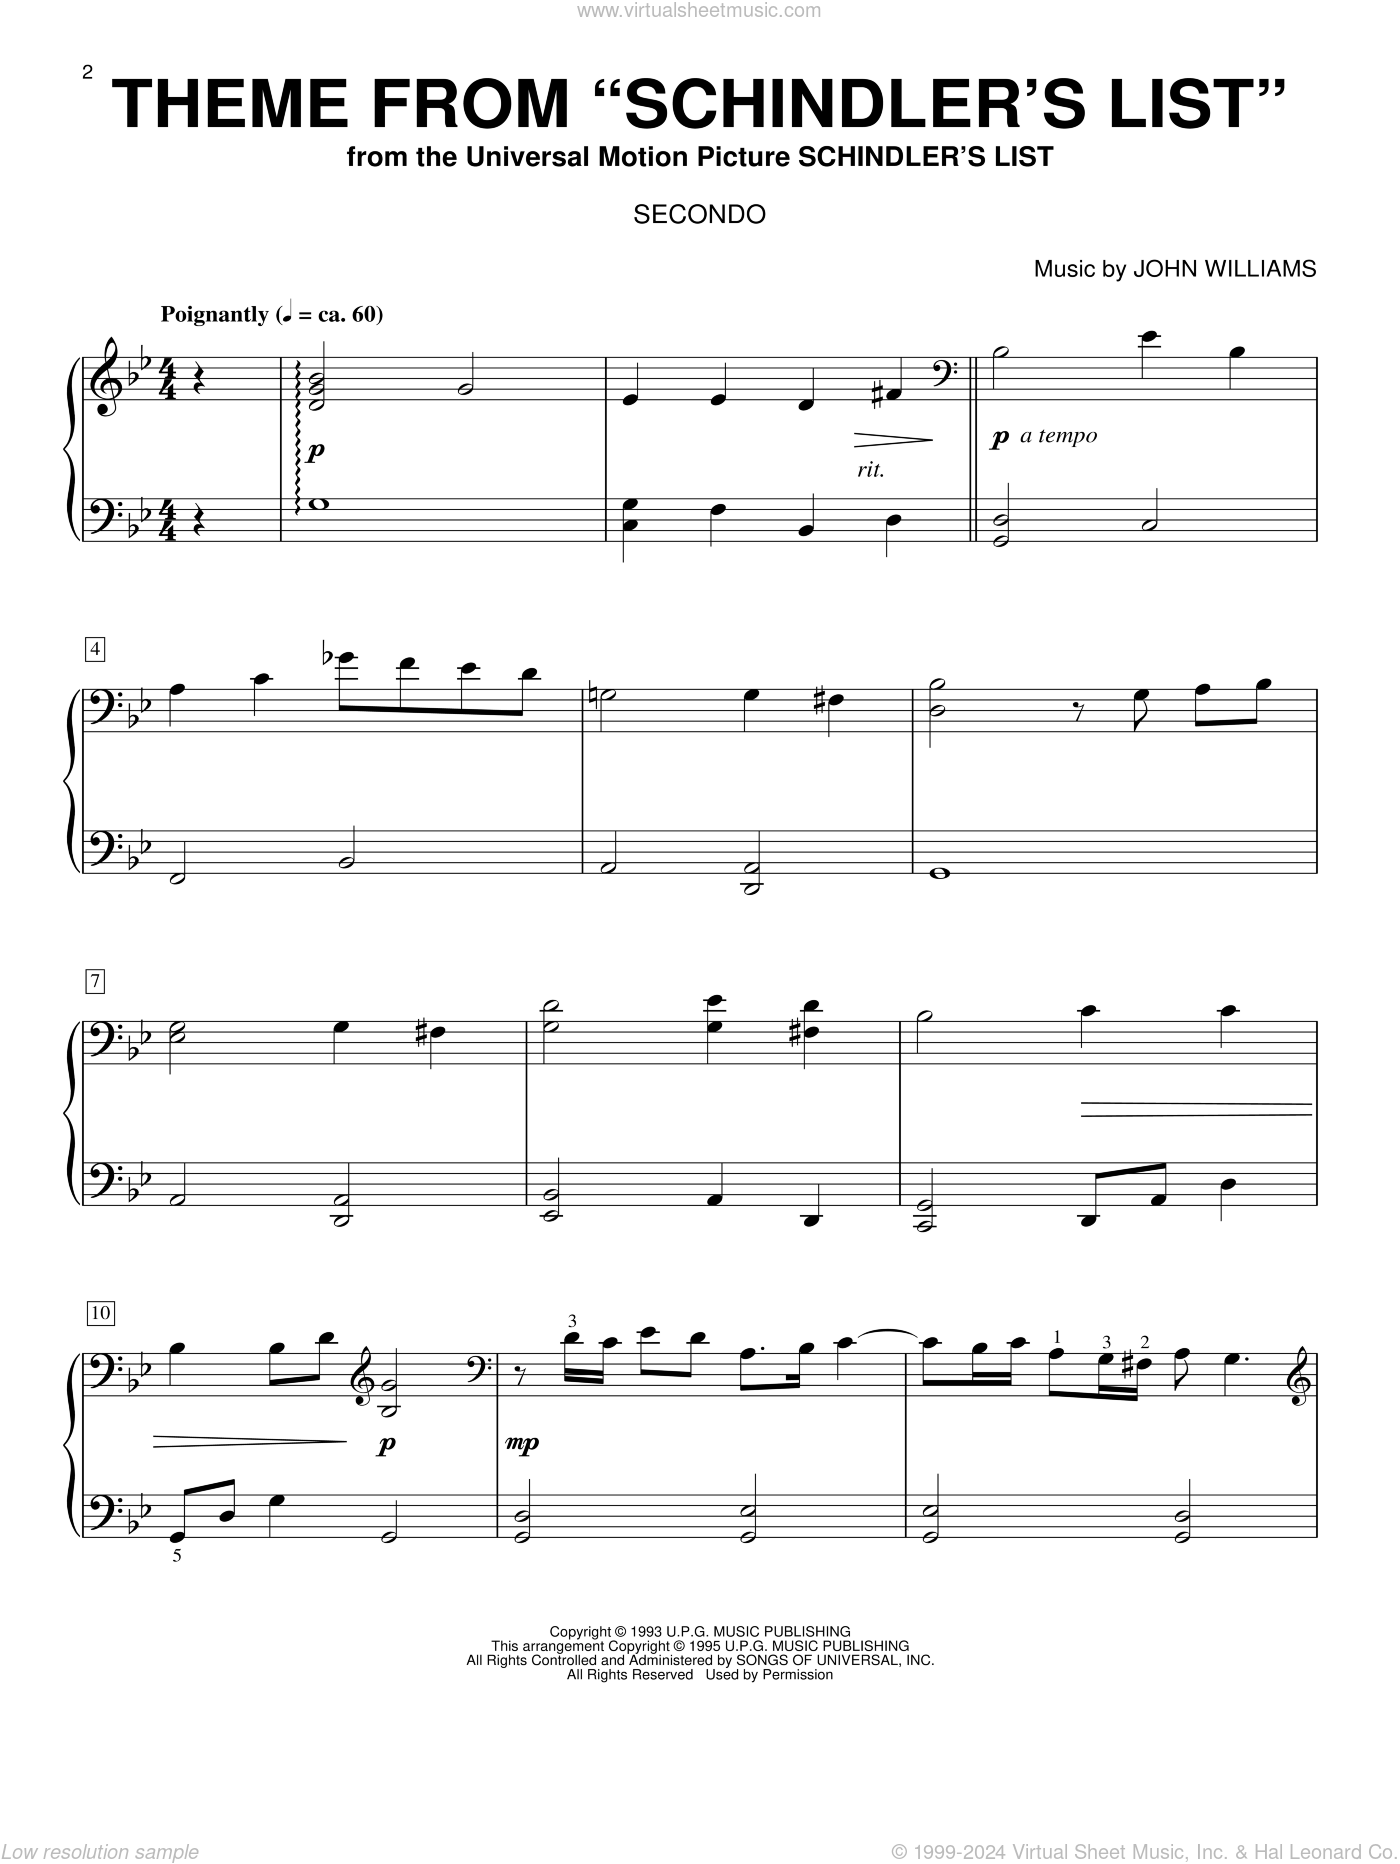 Williams - Theme from Schindler's List sheet music for piano four hands